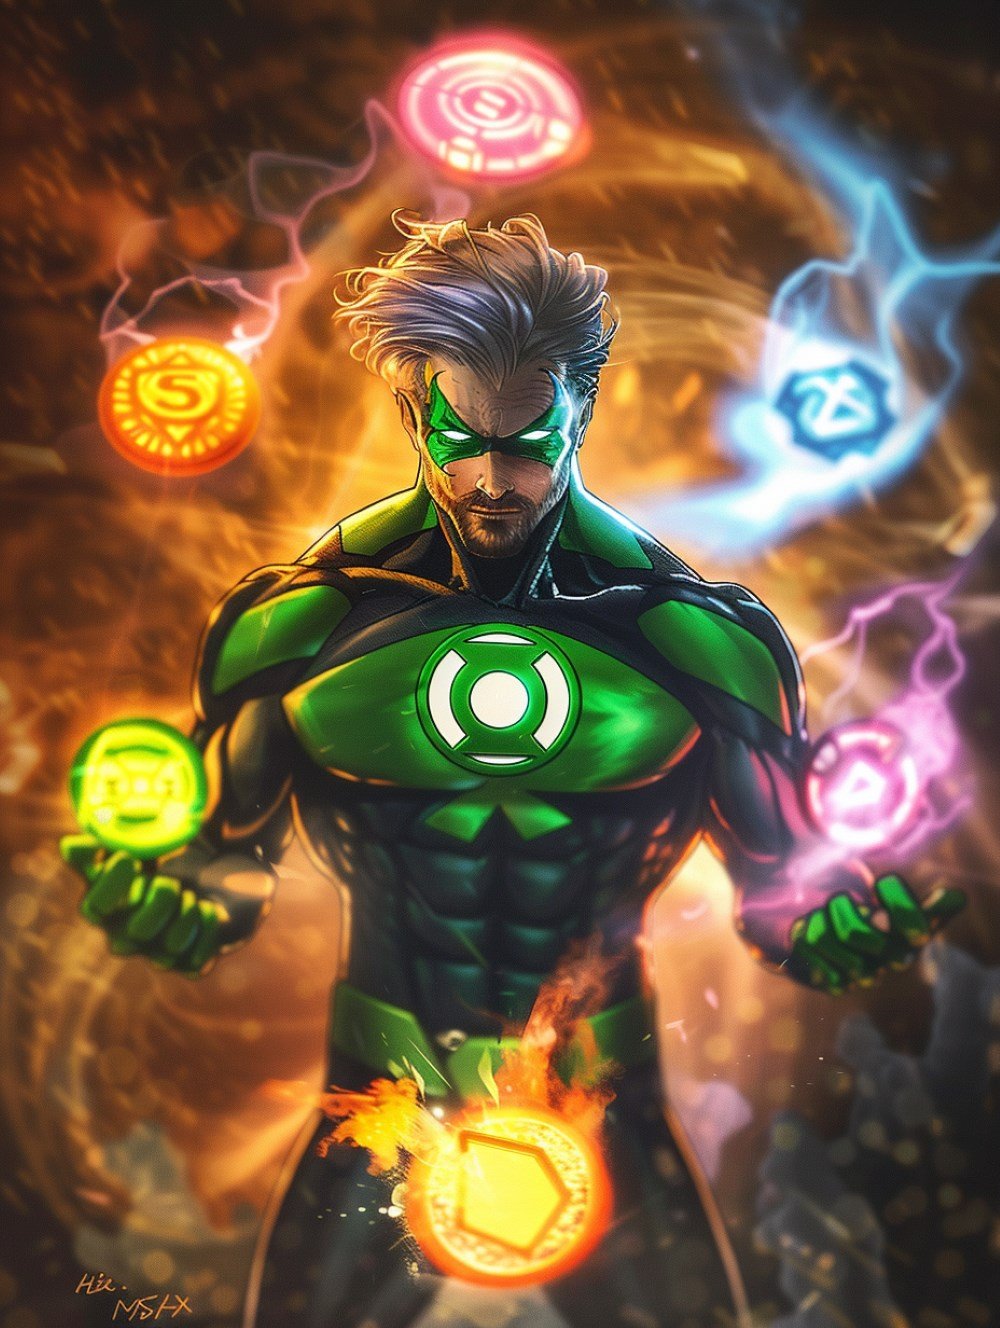 Kyle Rayer and other six lantern rings